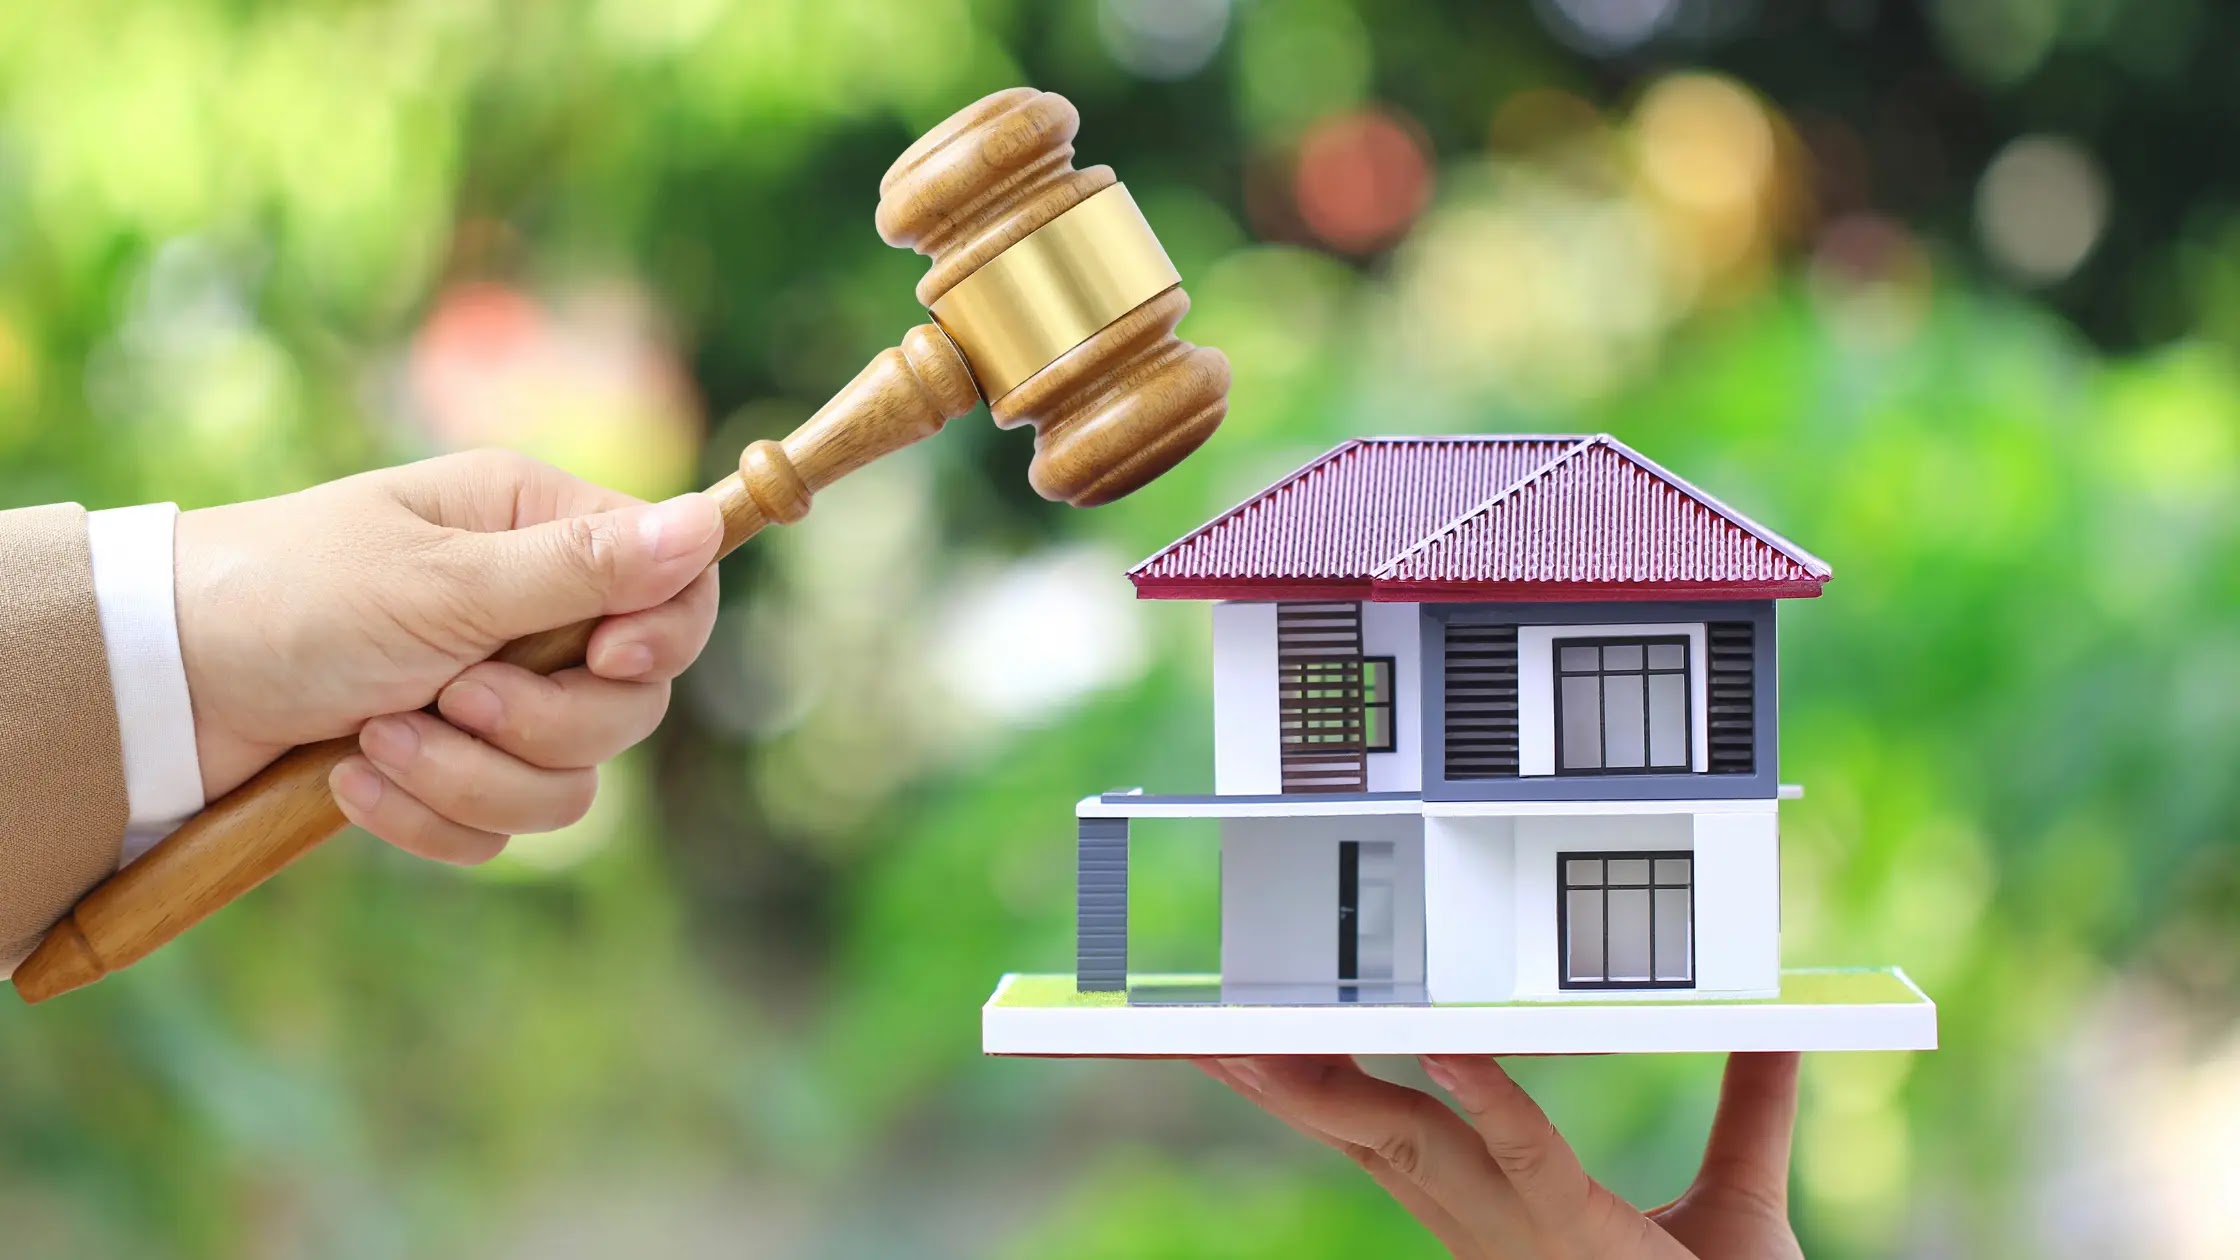 Can a Real Estate Lawyer Represent Both the Buyer and Seller